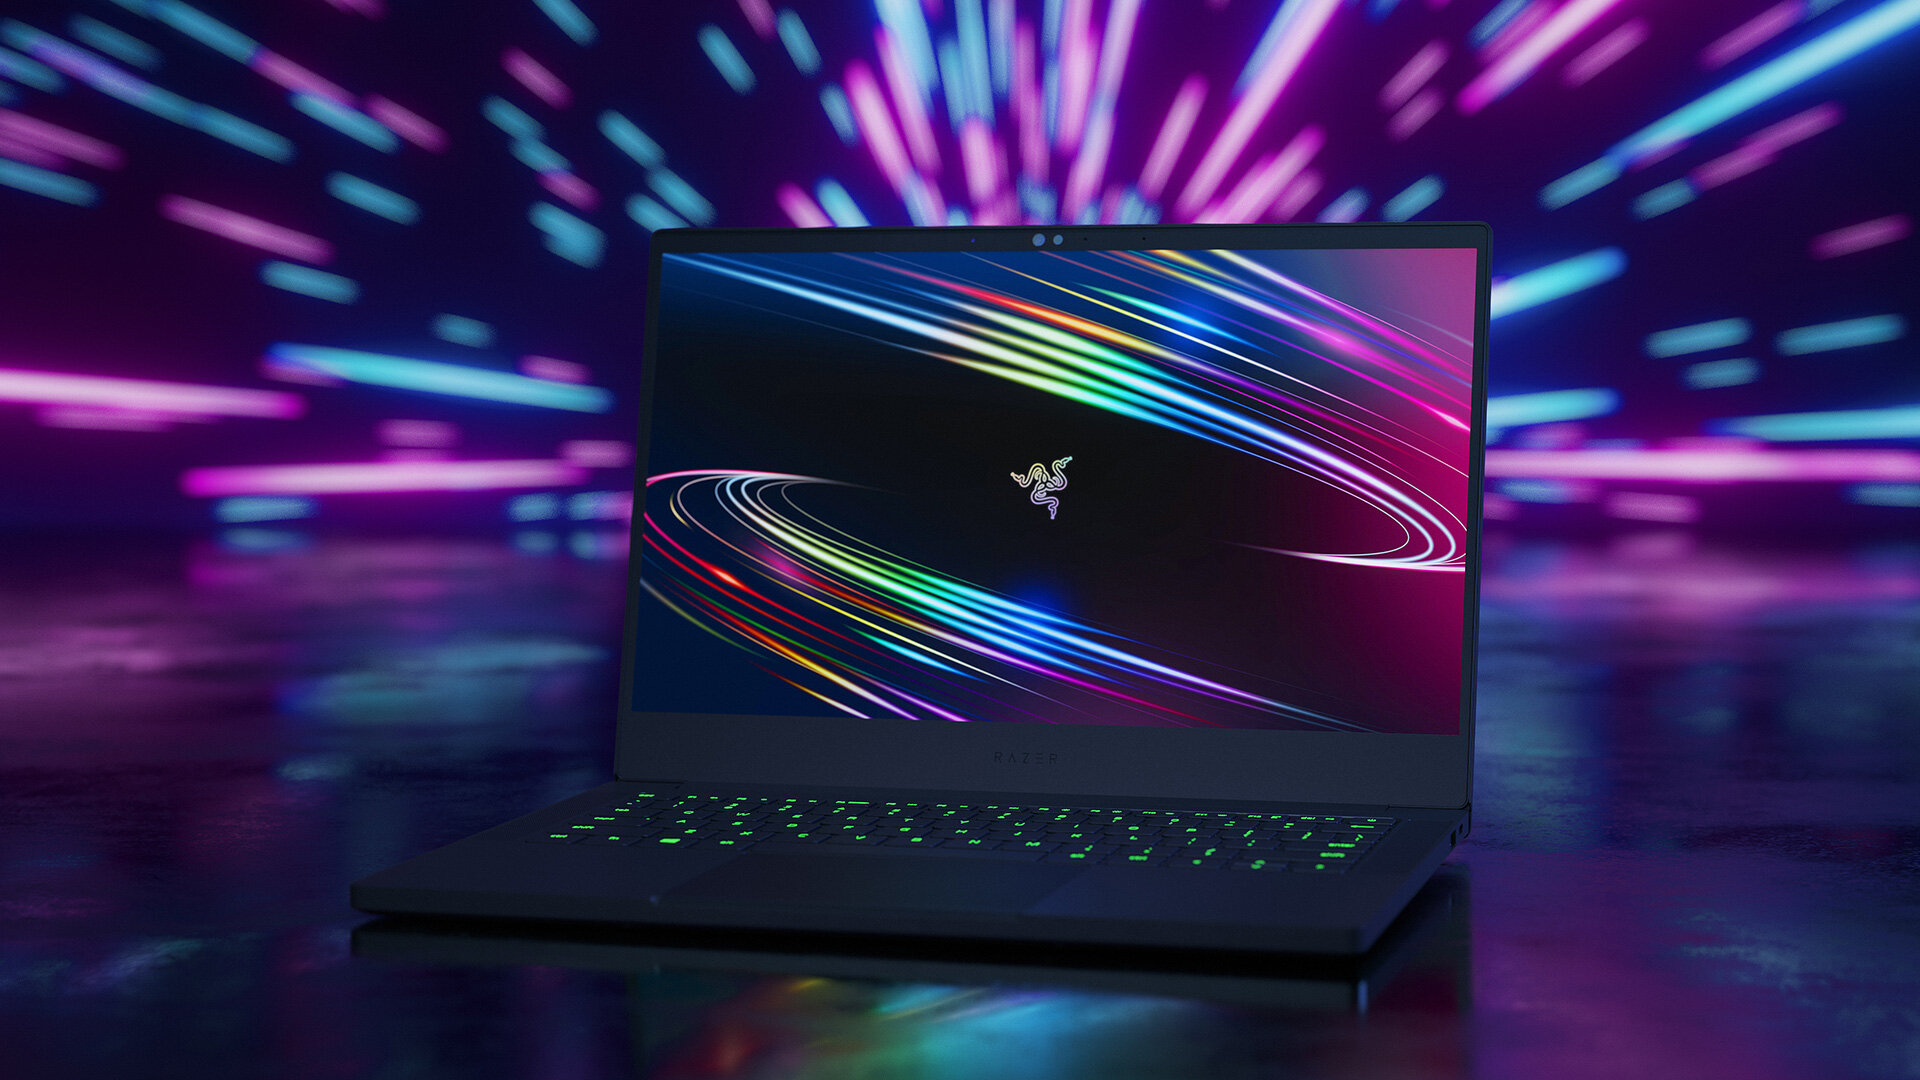 Razer Blade 15 Is a Dream Gaming Laptop for PC Gamers